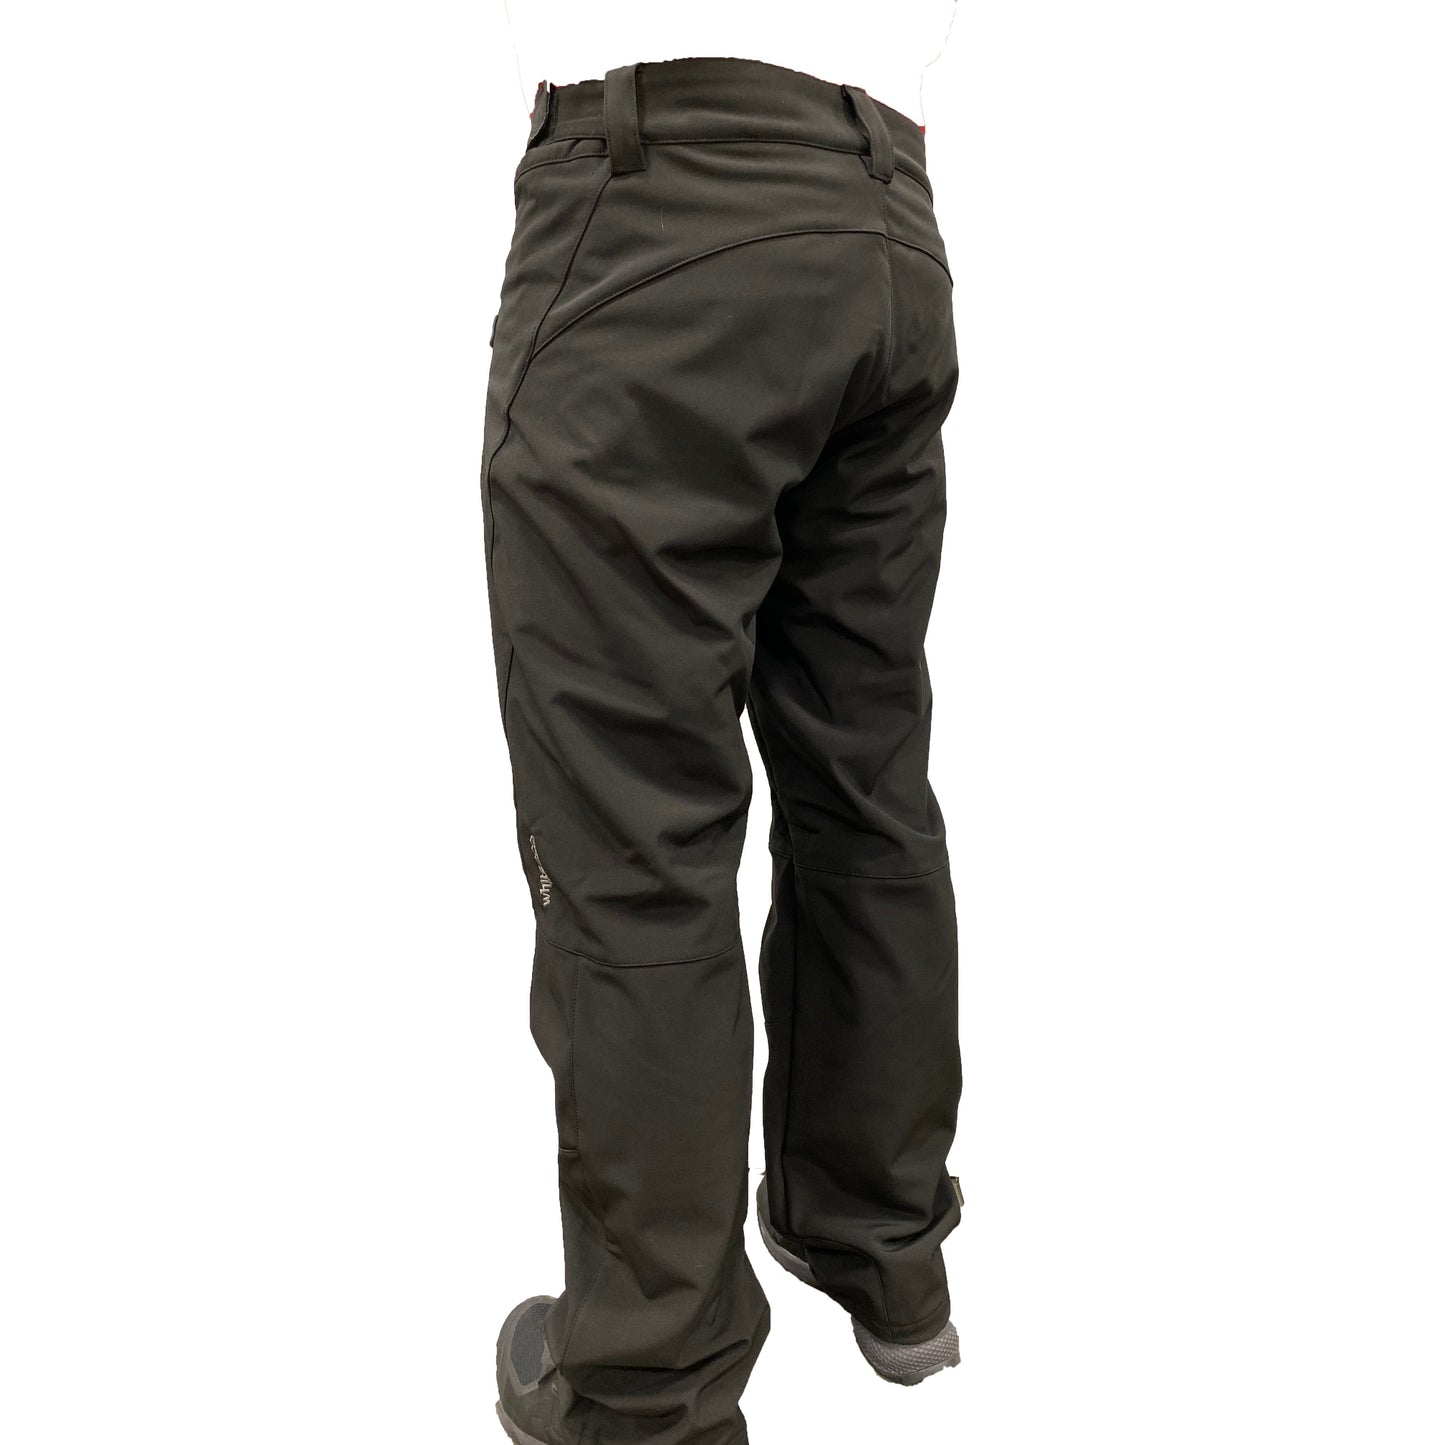 Insulated Softshell Pants